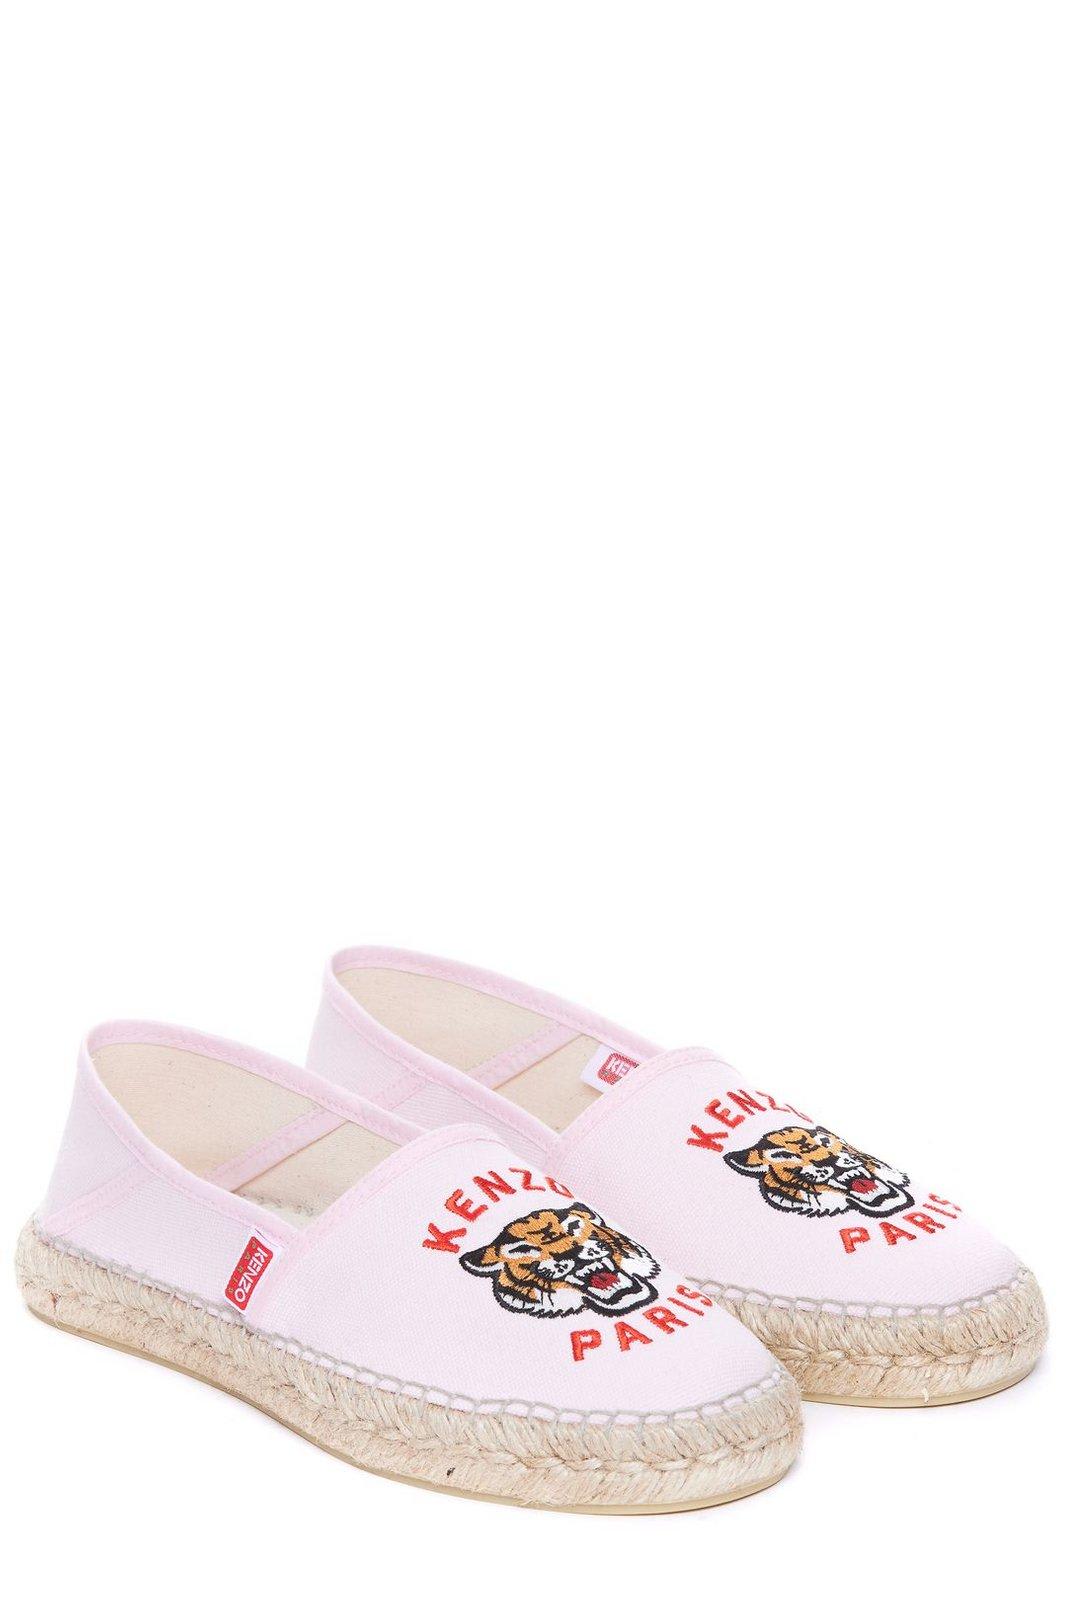 Shop Kenzo Slip-on Flat Shoes In Faded Pink